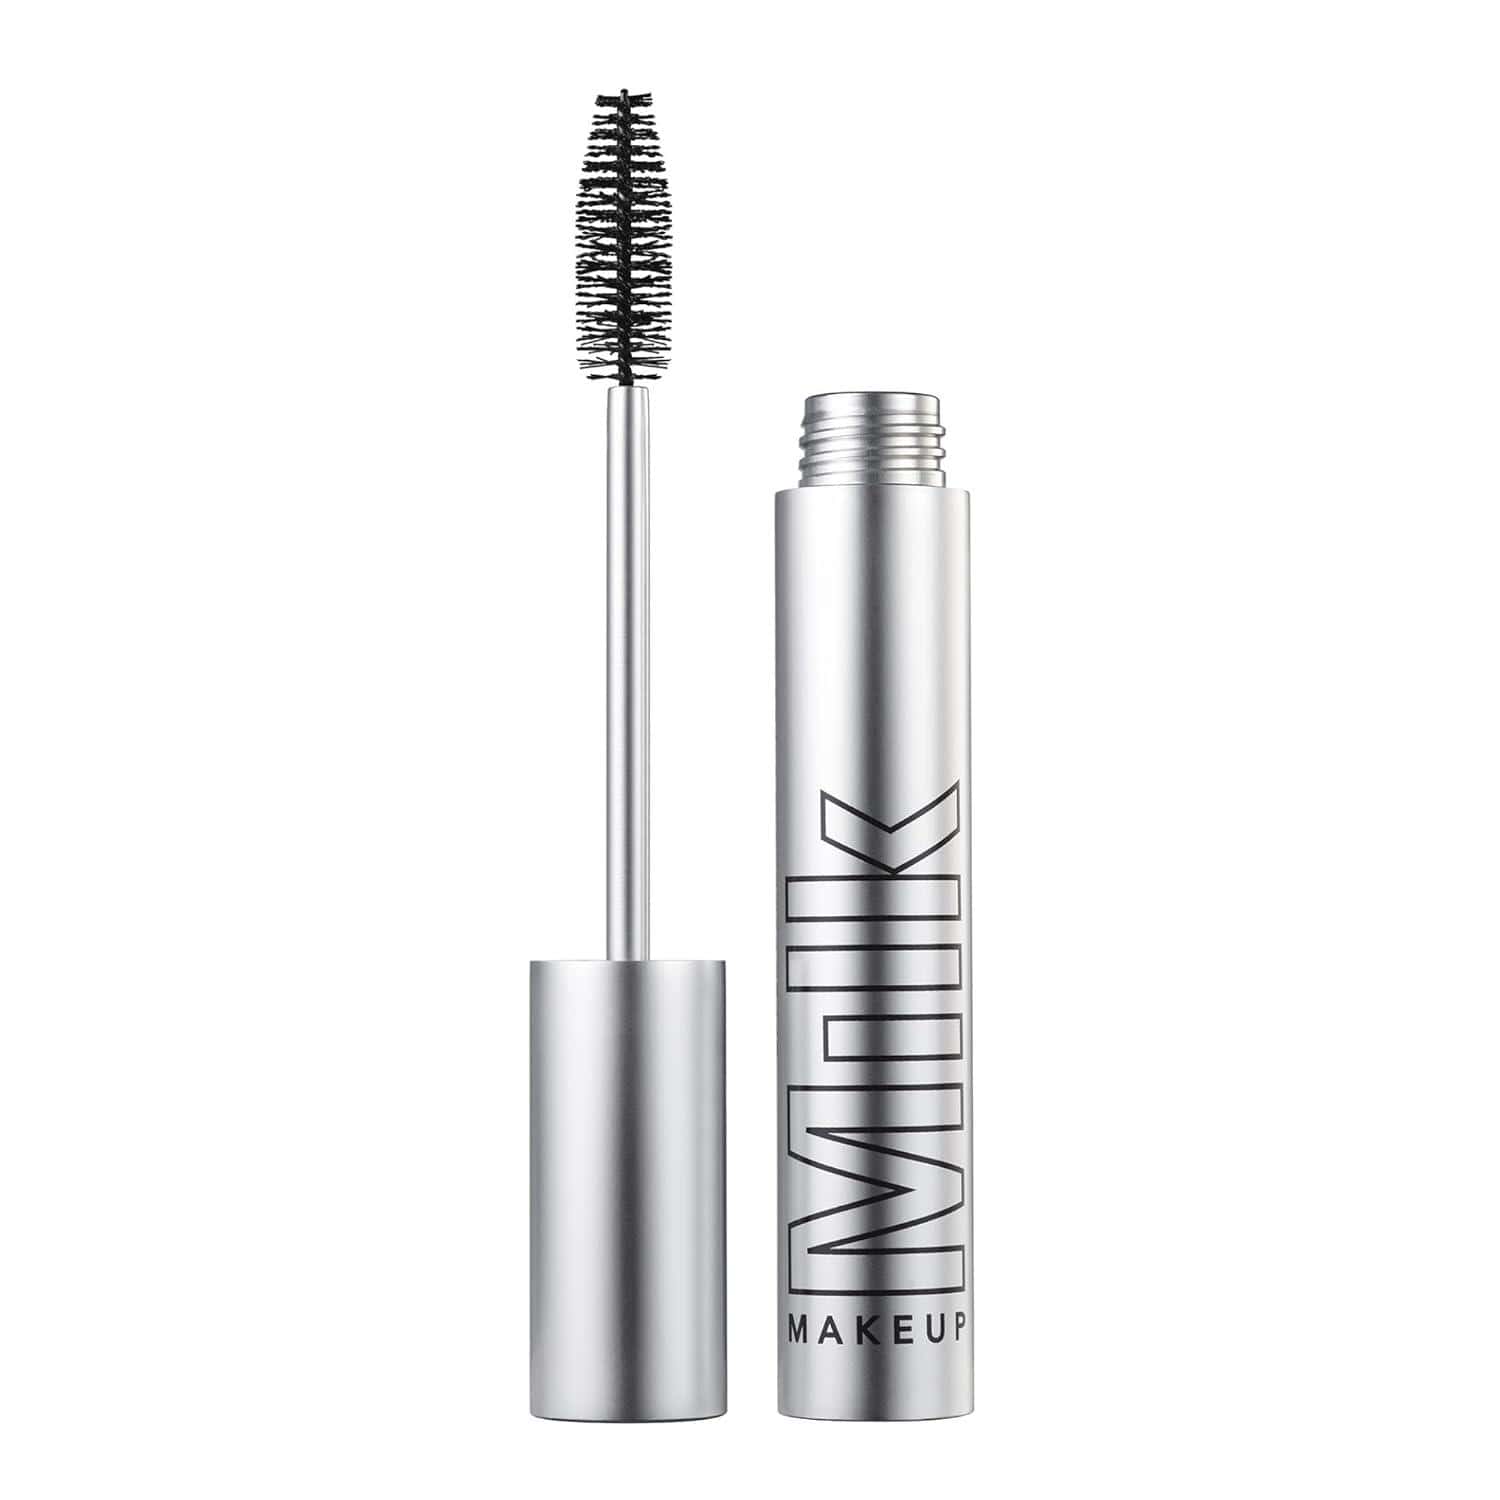 Embracing vegan and cruelty-free beauty, Milk Makeup's mascara, enriched with heart-shaped fibers, is my choice for achieving longer and fuller lashes among my volumizing mascaras.